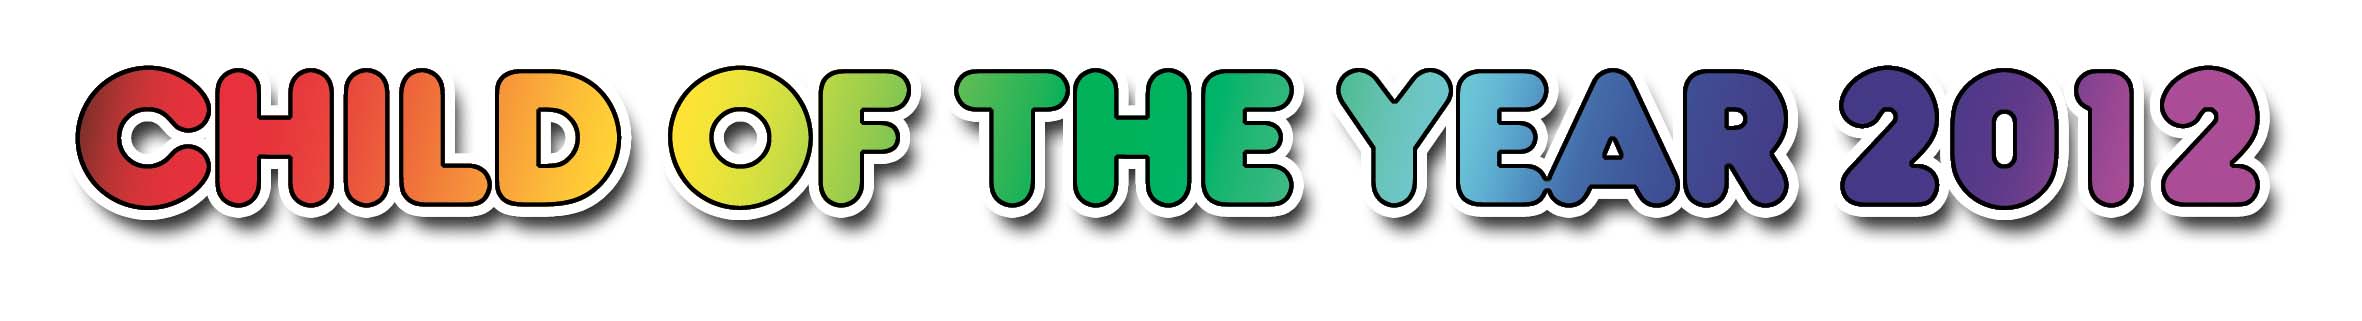 child of the year logo